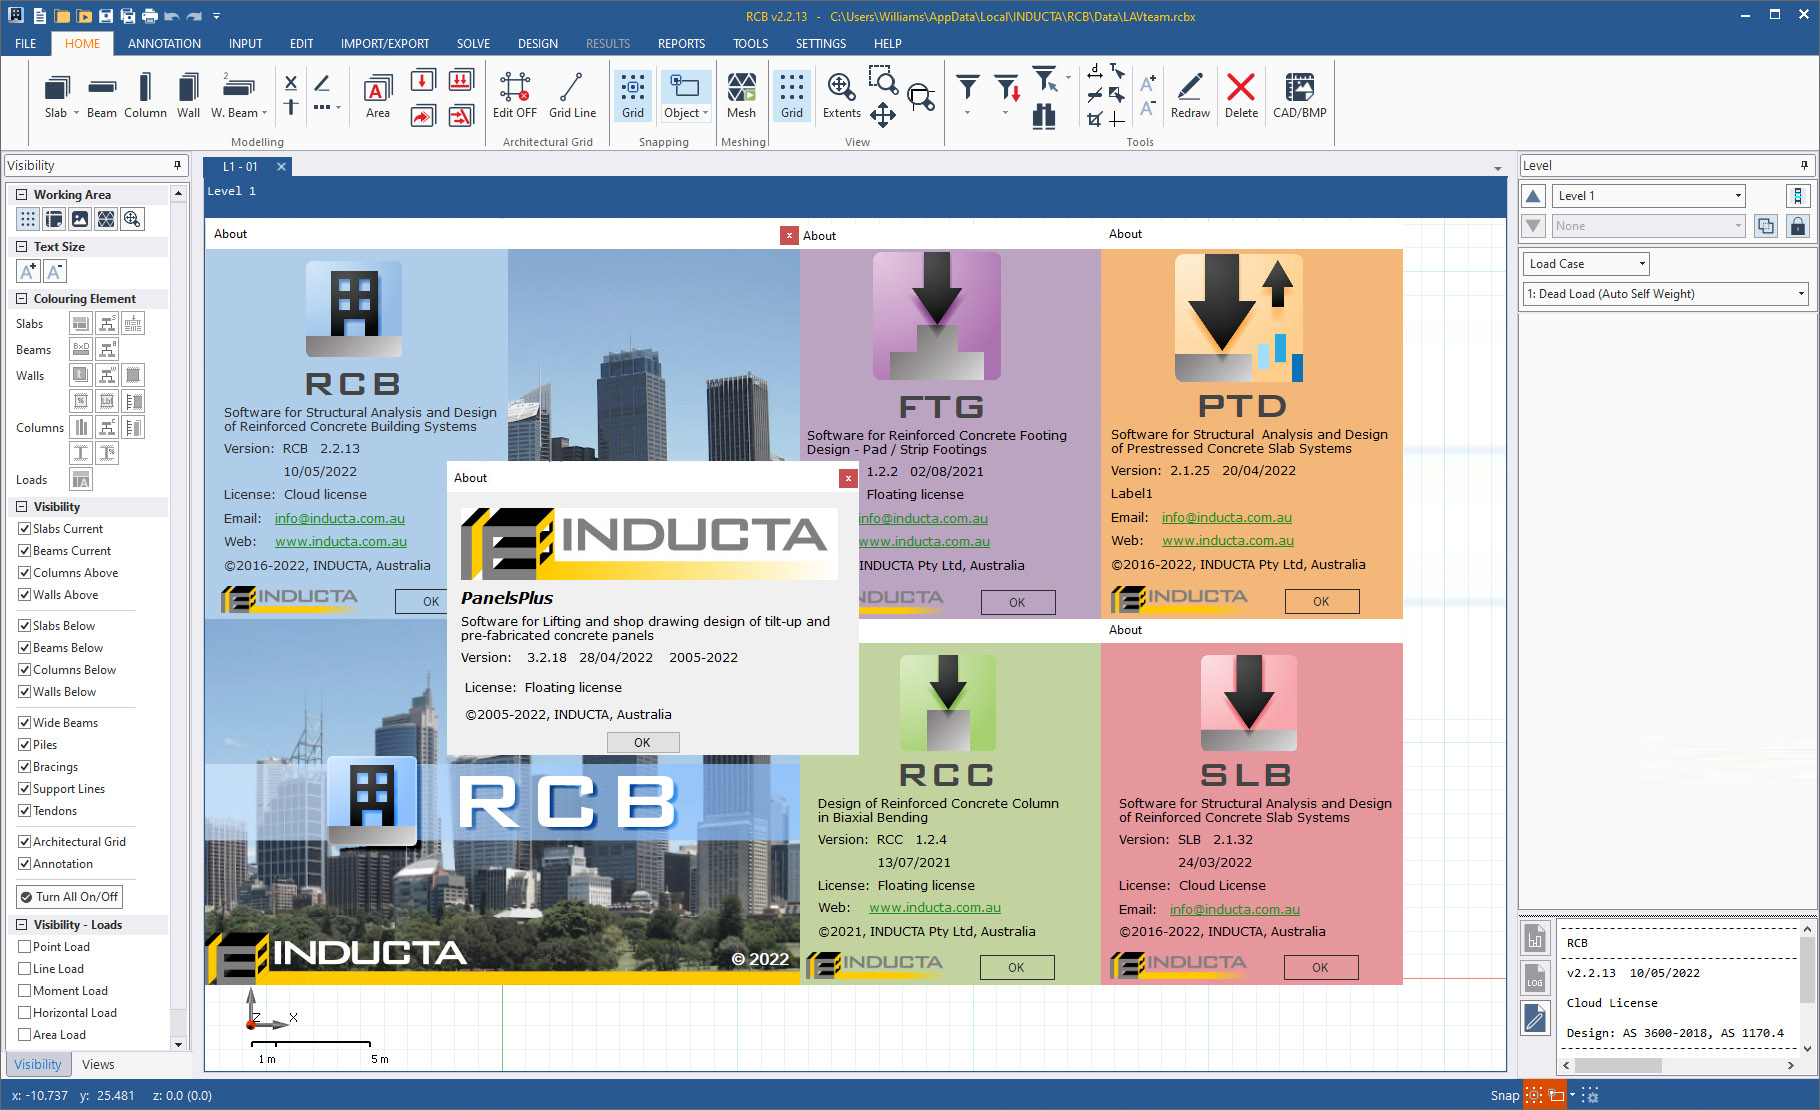 INDUCTA Products Suite 2022